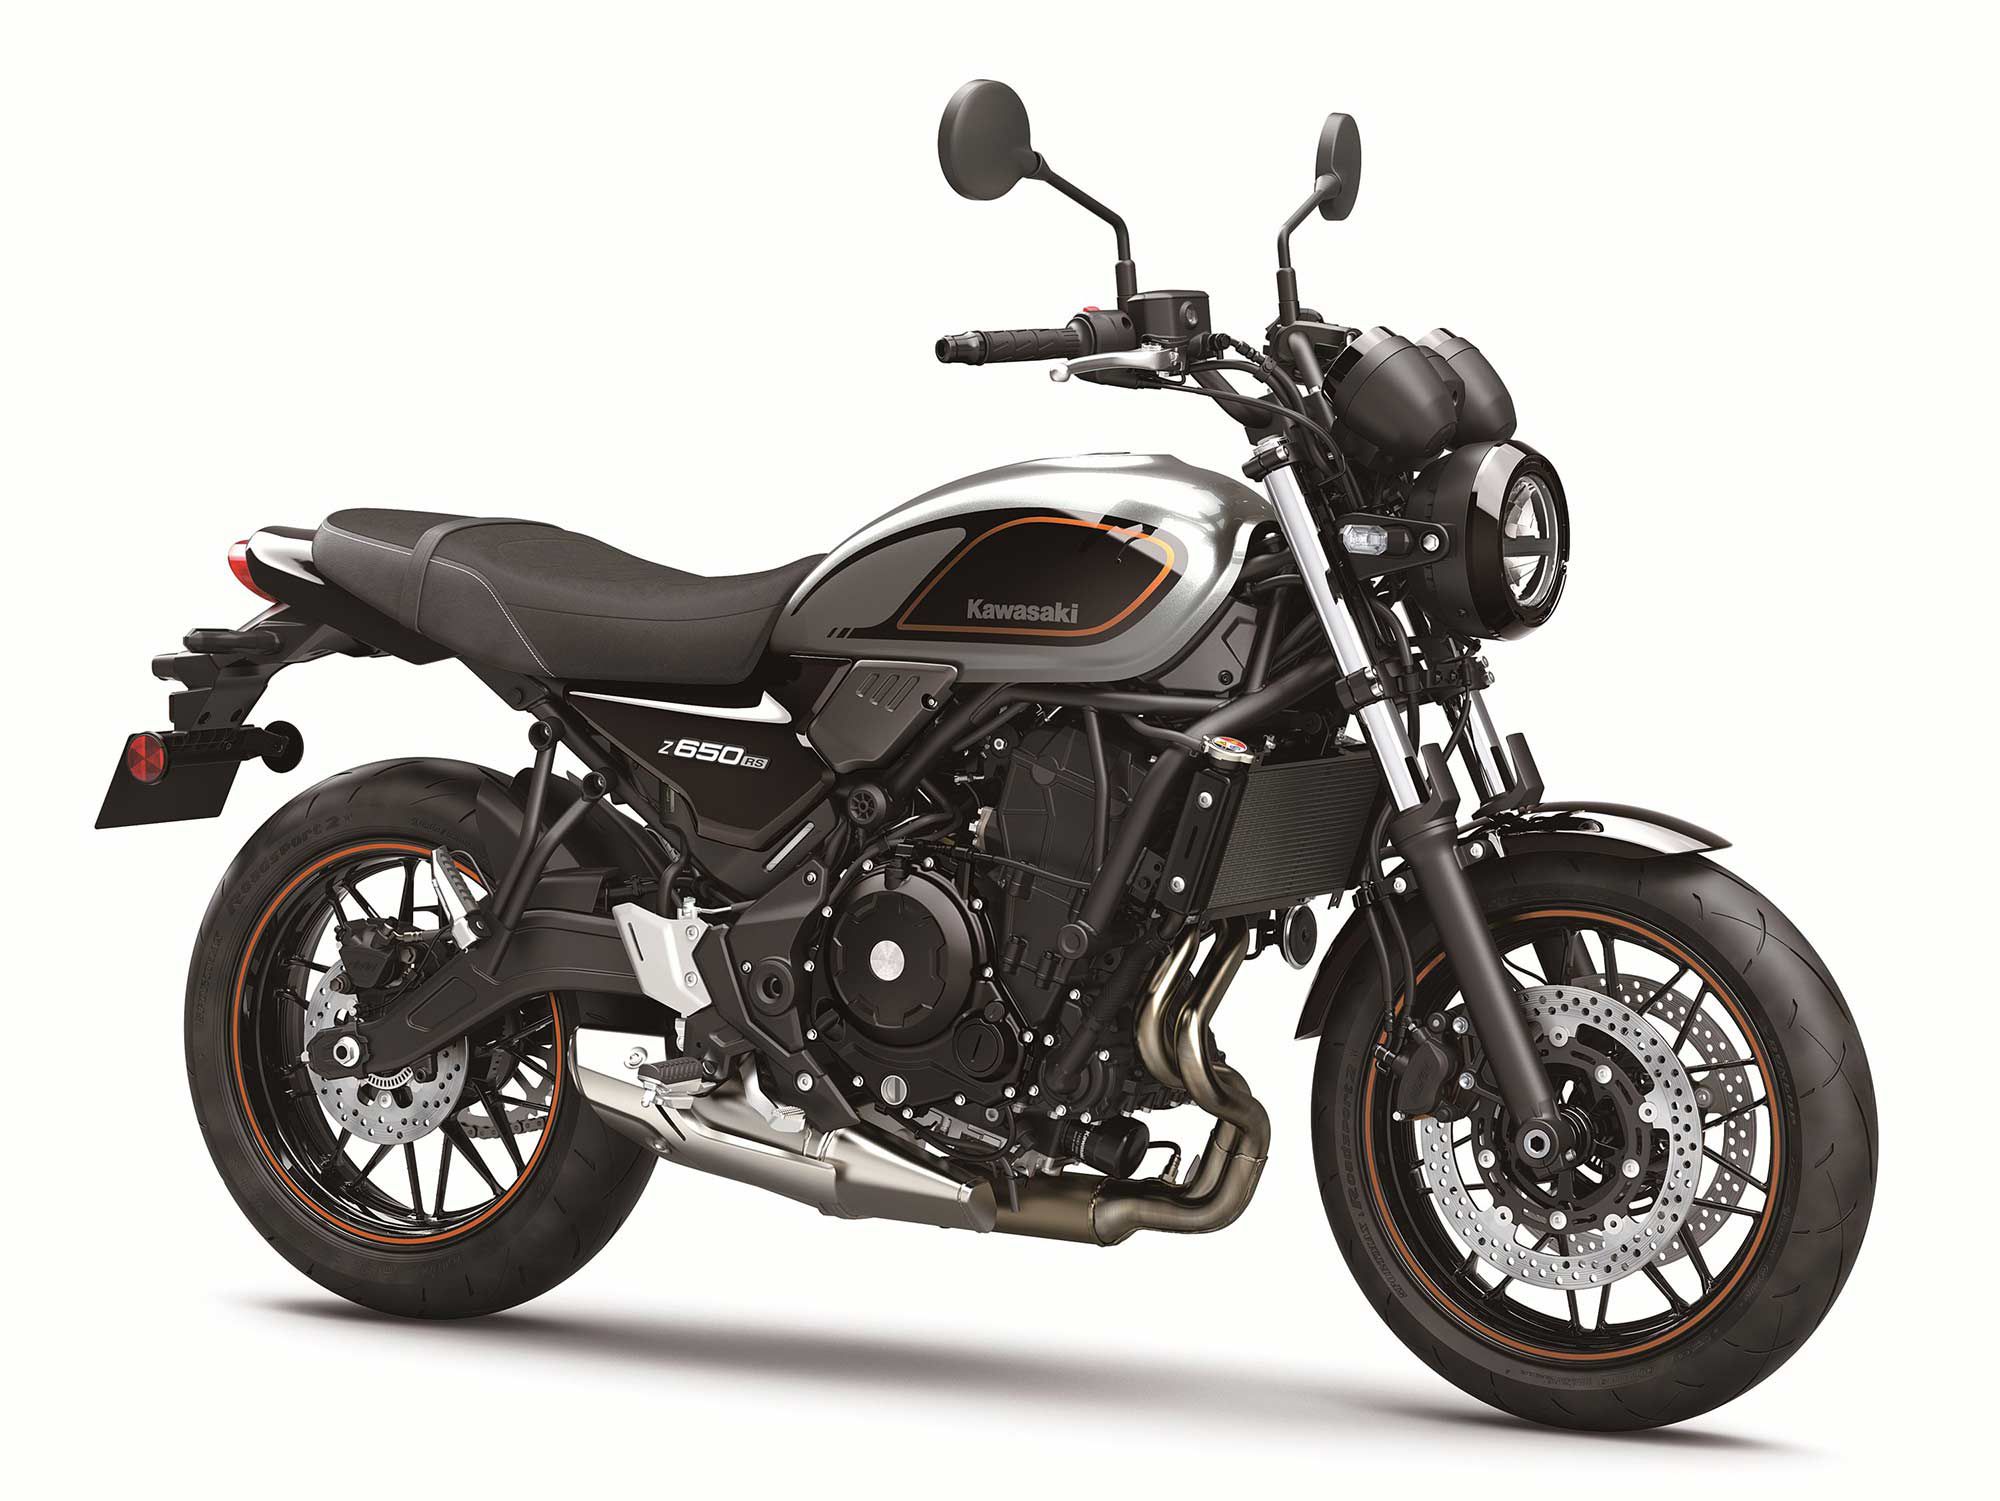 The 2022 Kawasaki Z650RS promises to be approachable and head-turning.